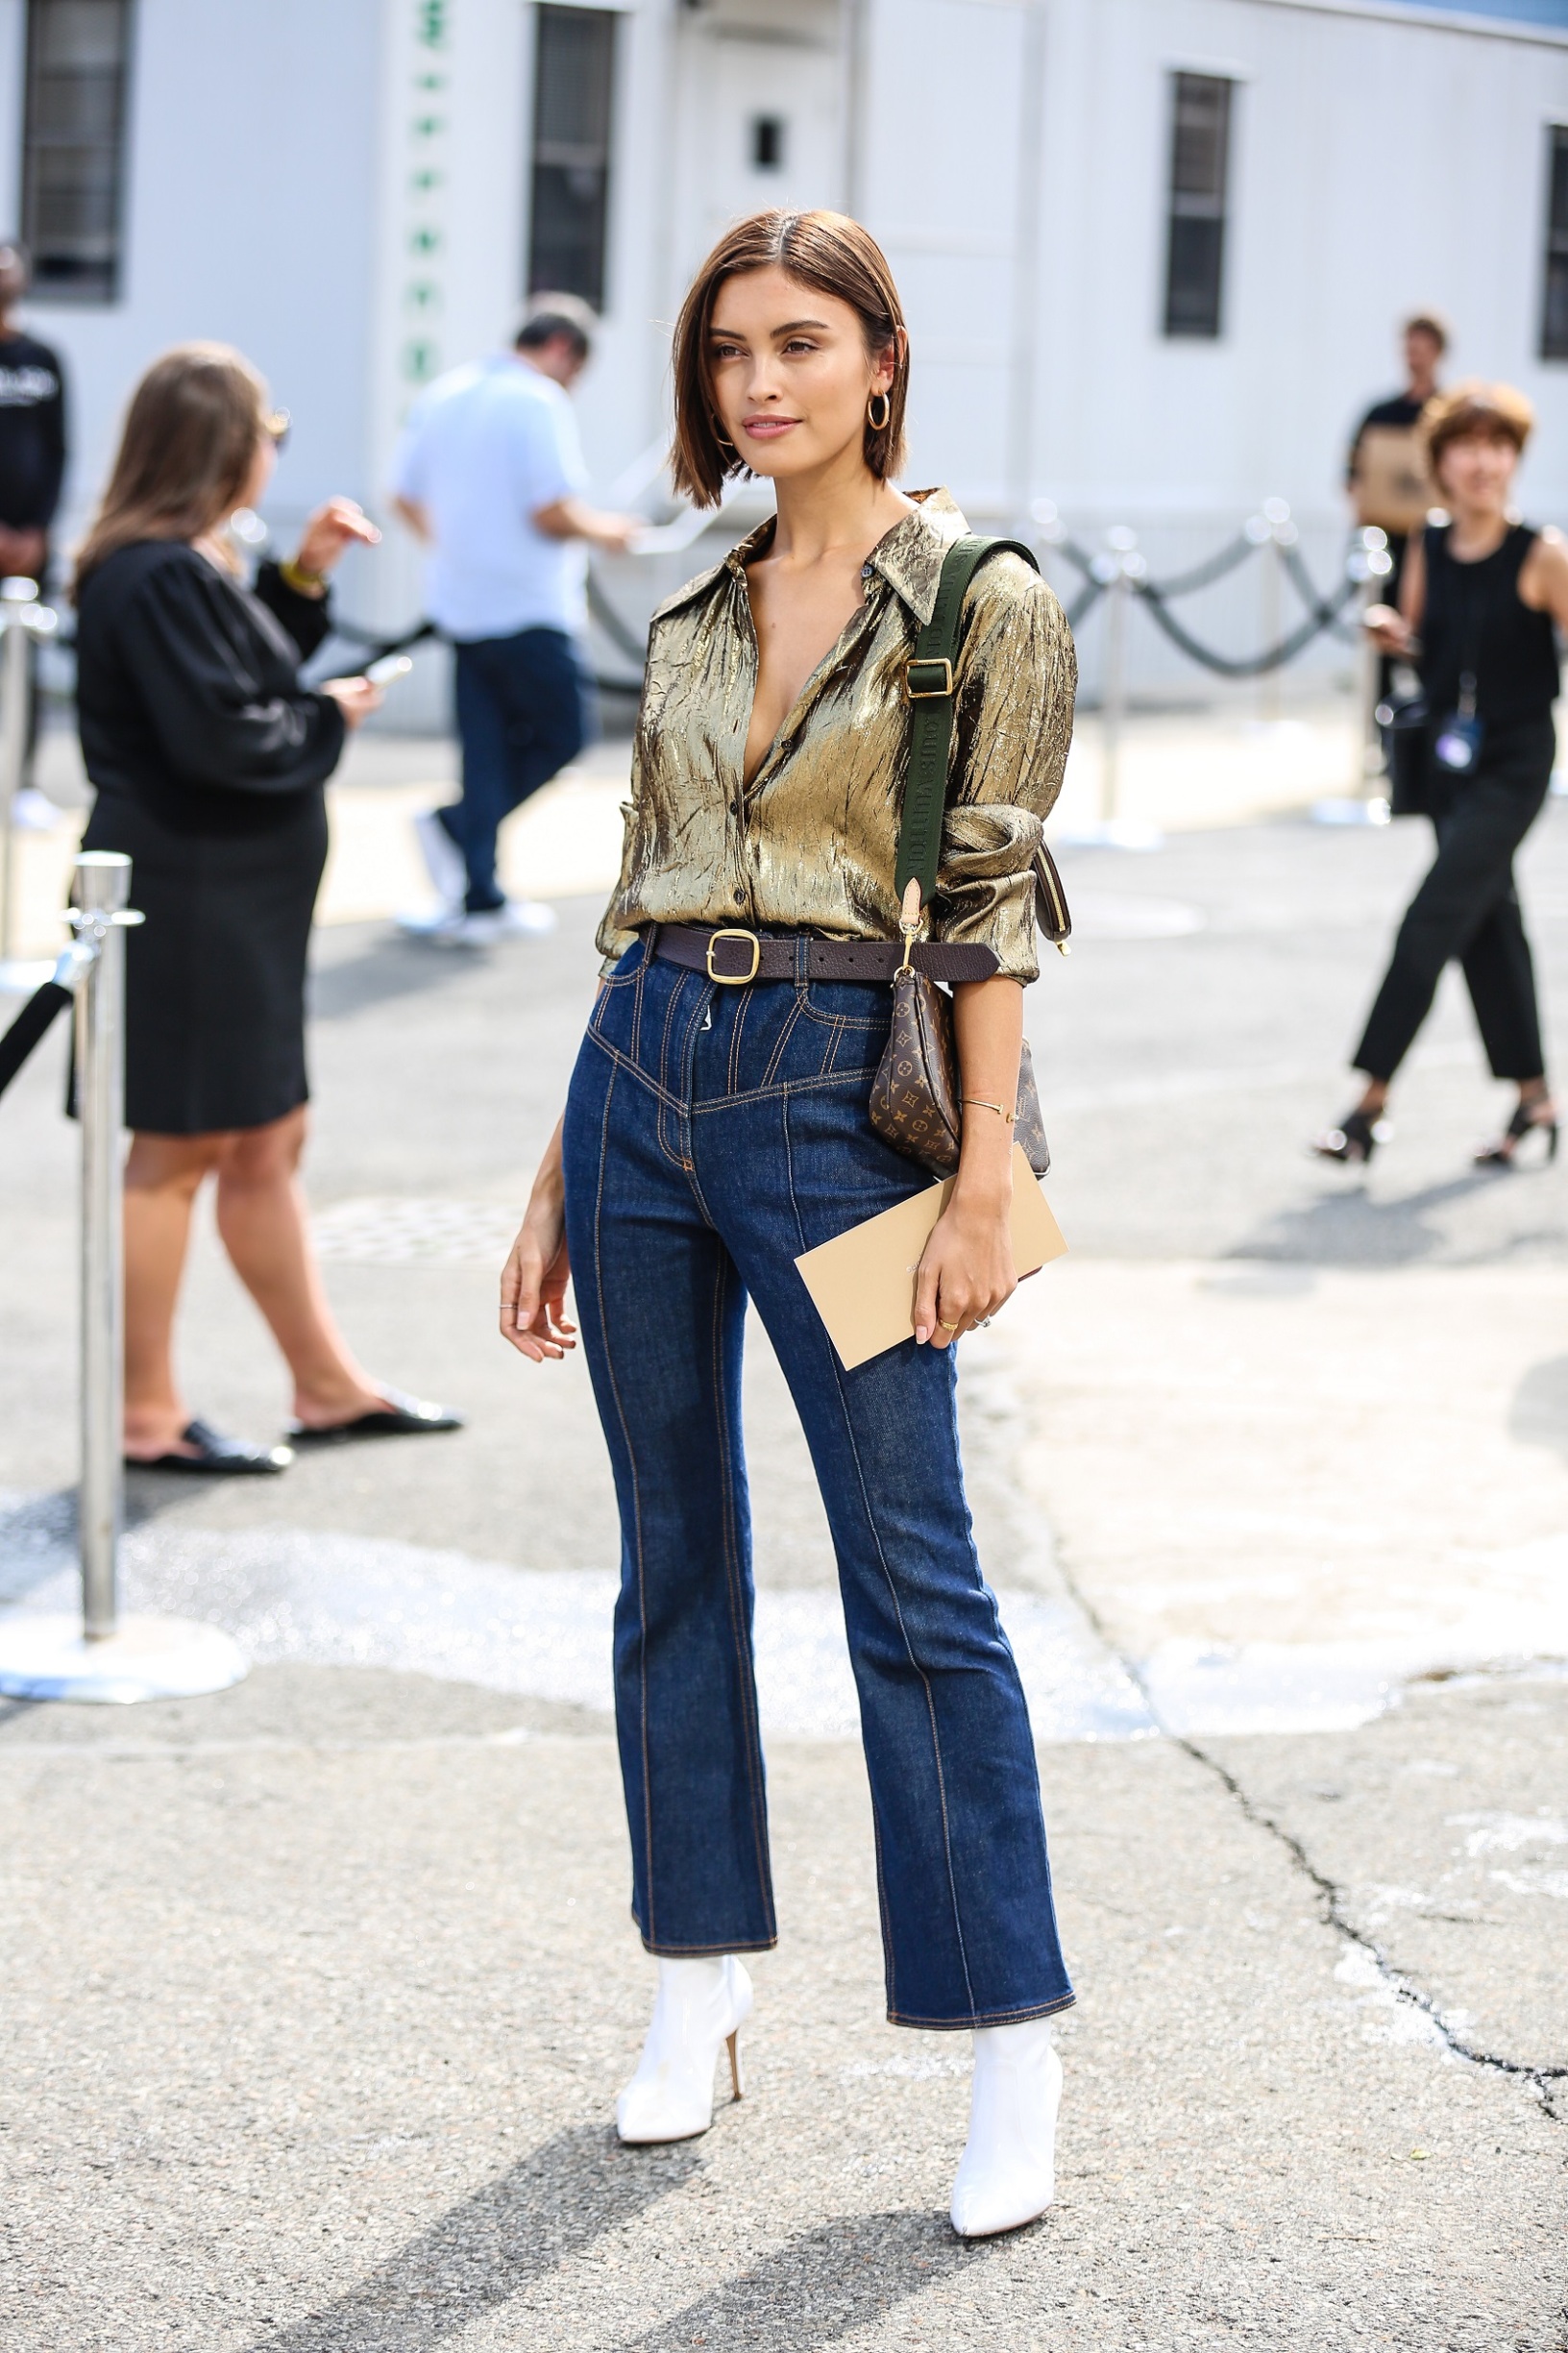 NEW YORK, NEW YORK - SEPTEMBER 11: A guest is seen wearing a gold tops and blue jeans during New York Fashion Week on September 11, 2019 in New York City. (Photo by Donell Woodson/Getty Images)